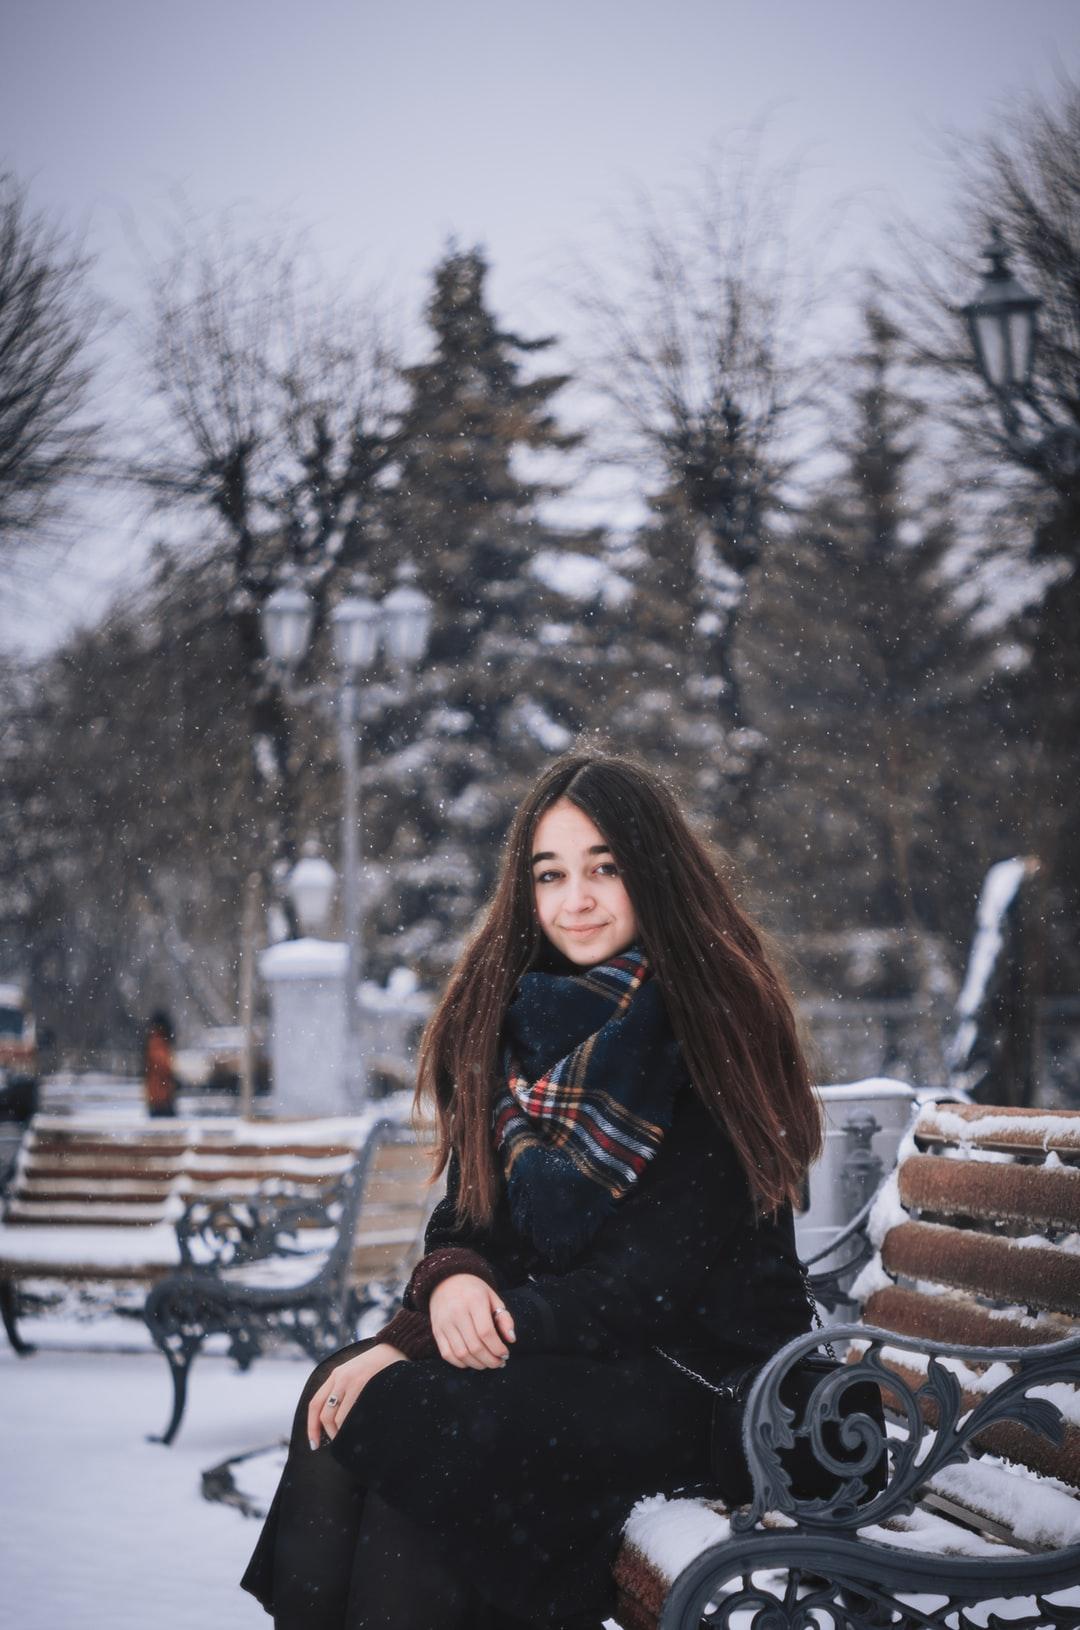 Girl In Snow Picture. Download Free Image